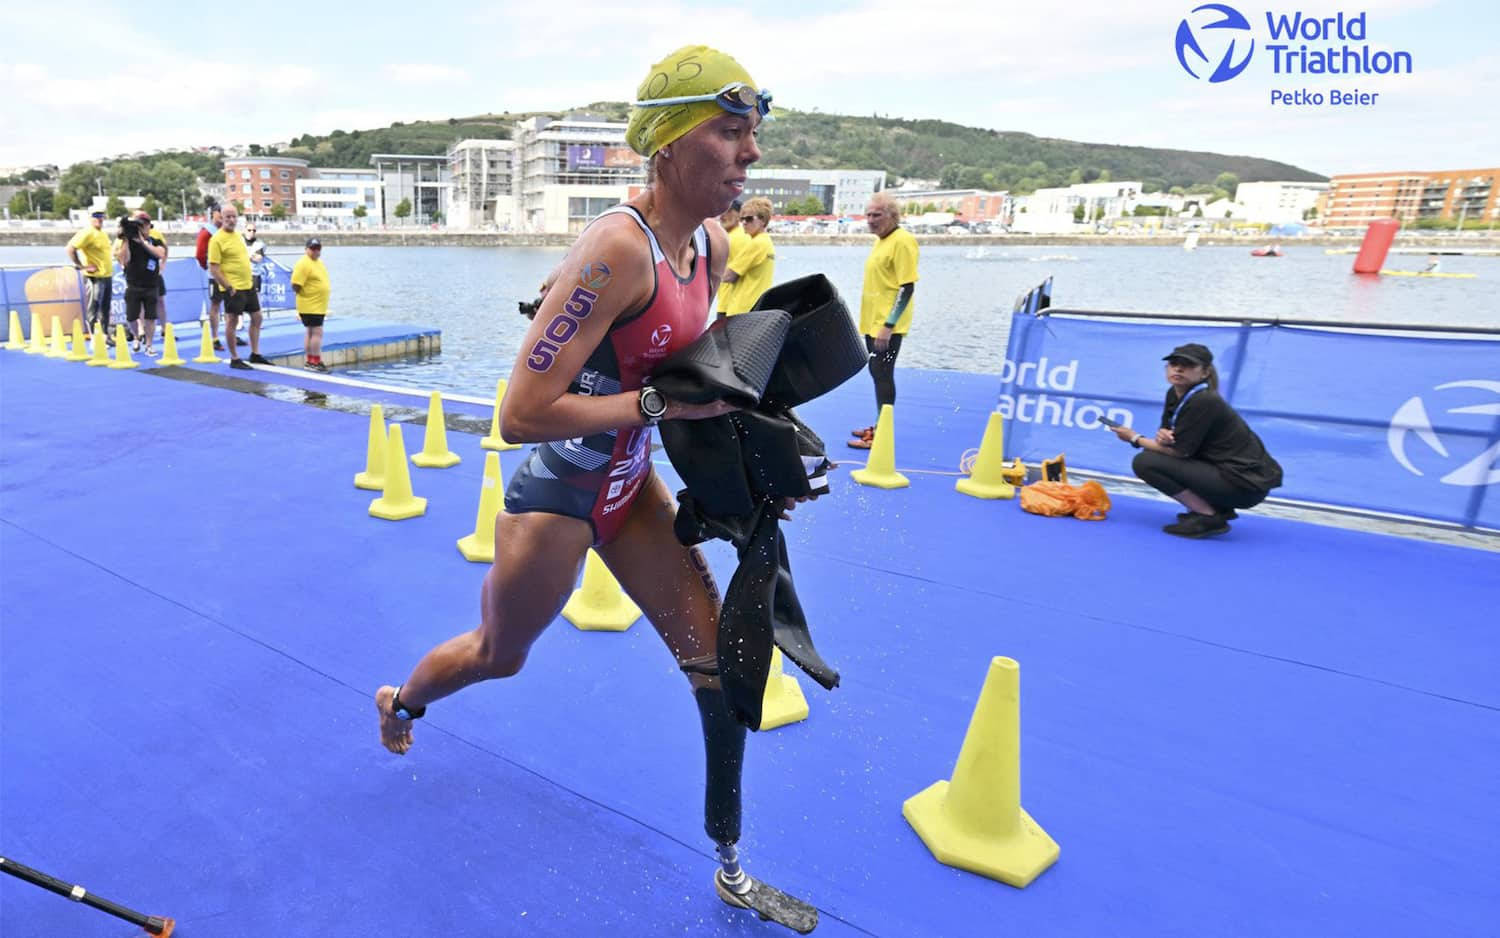 Determination Exemplified: Paralympic Triathlon Athlete in Action Wallpaper